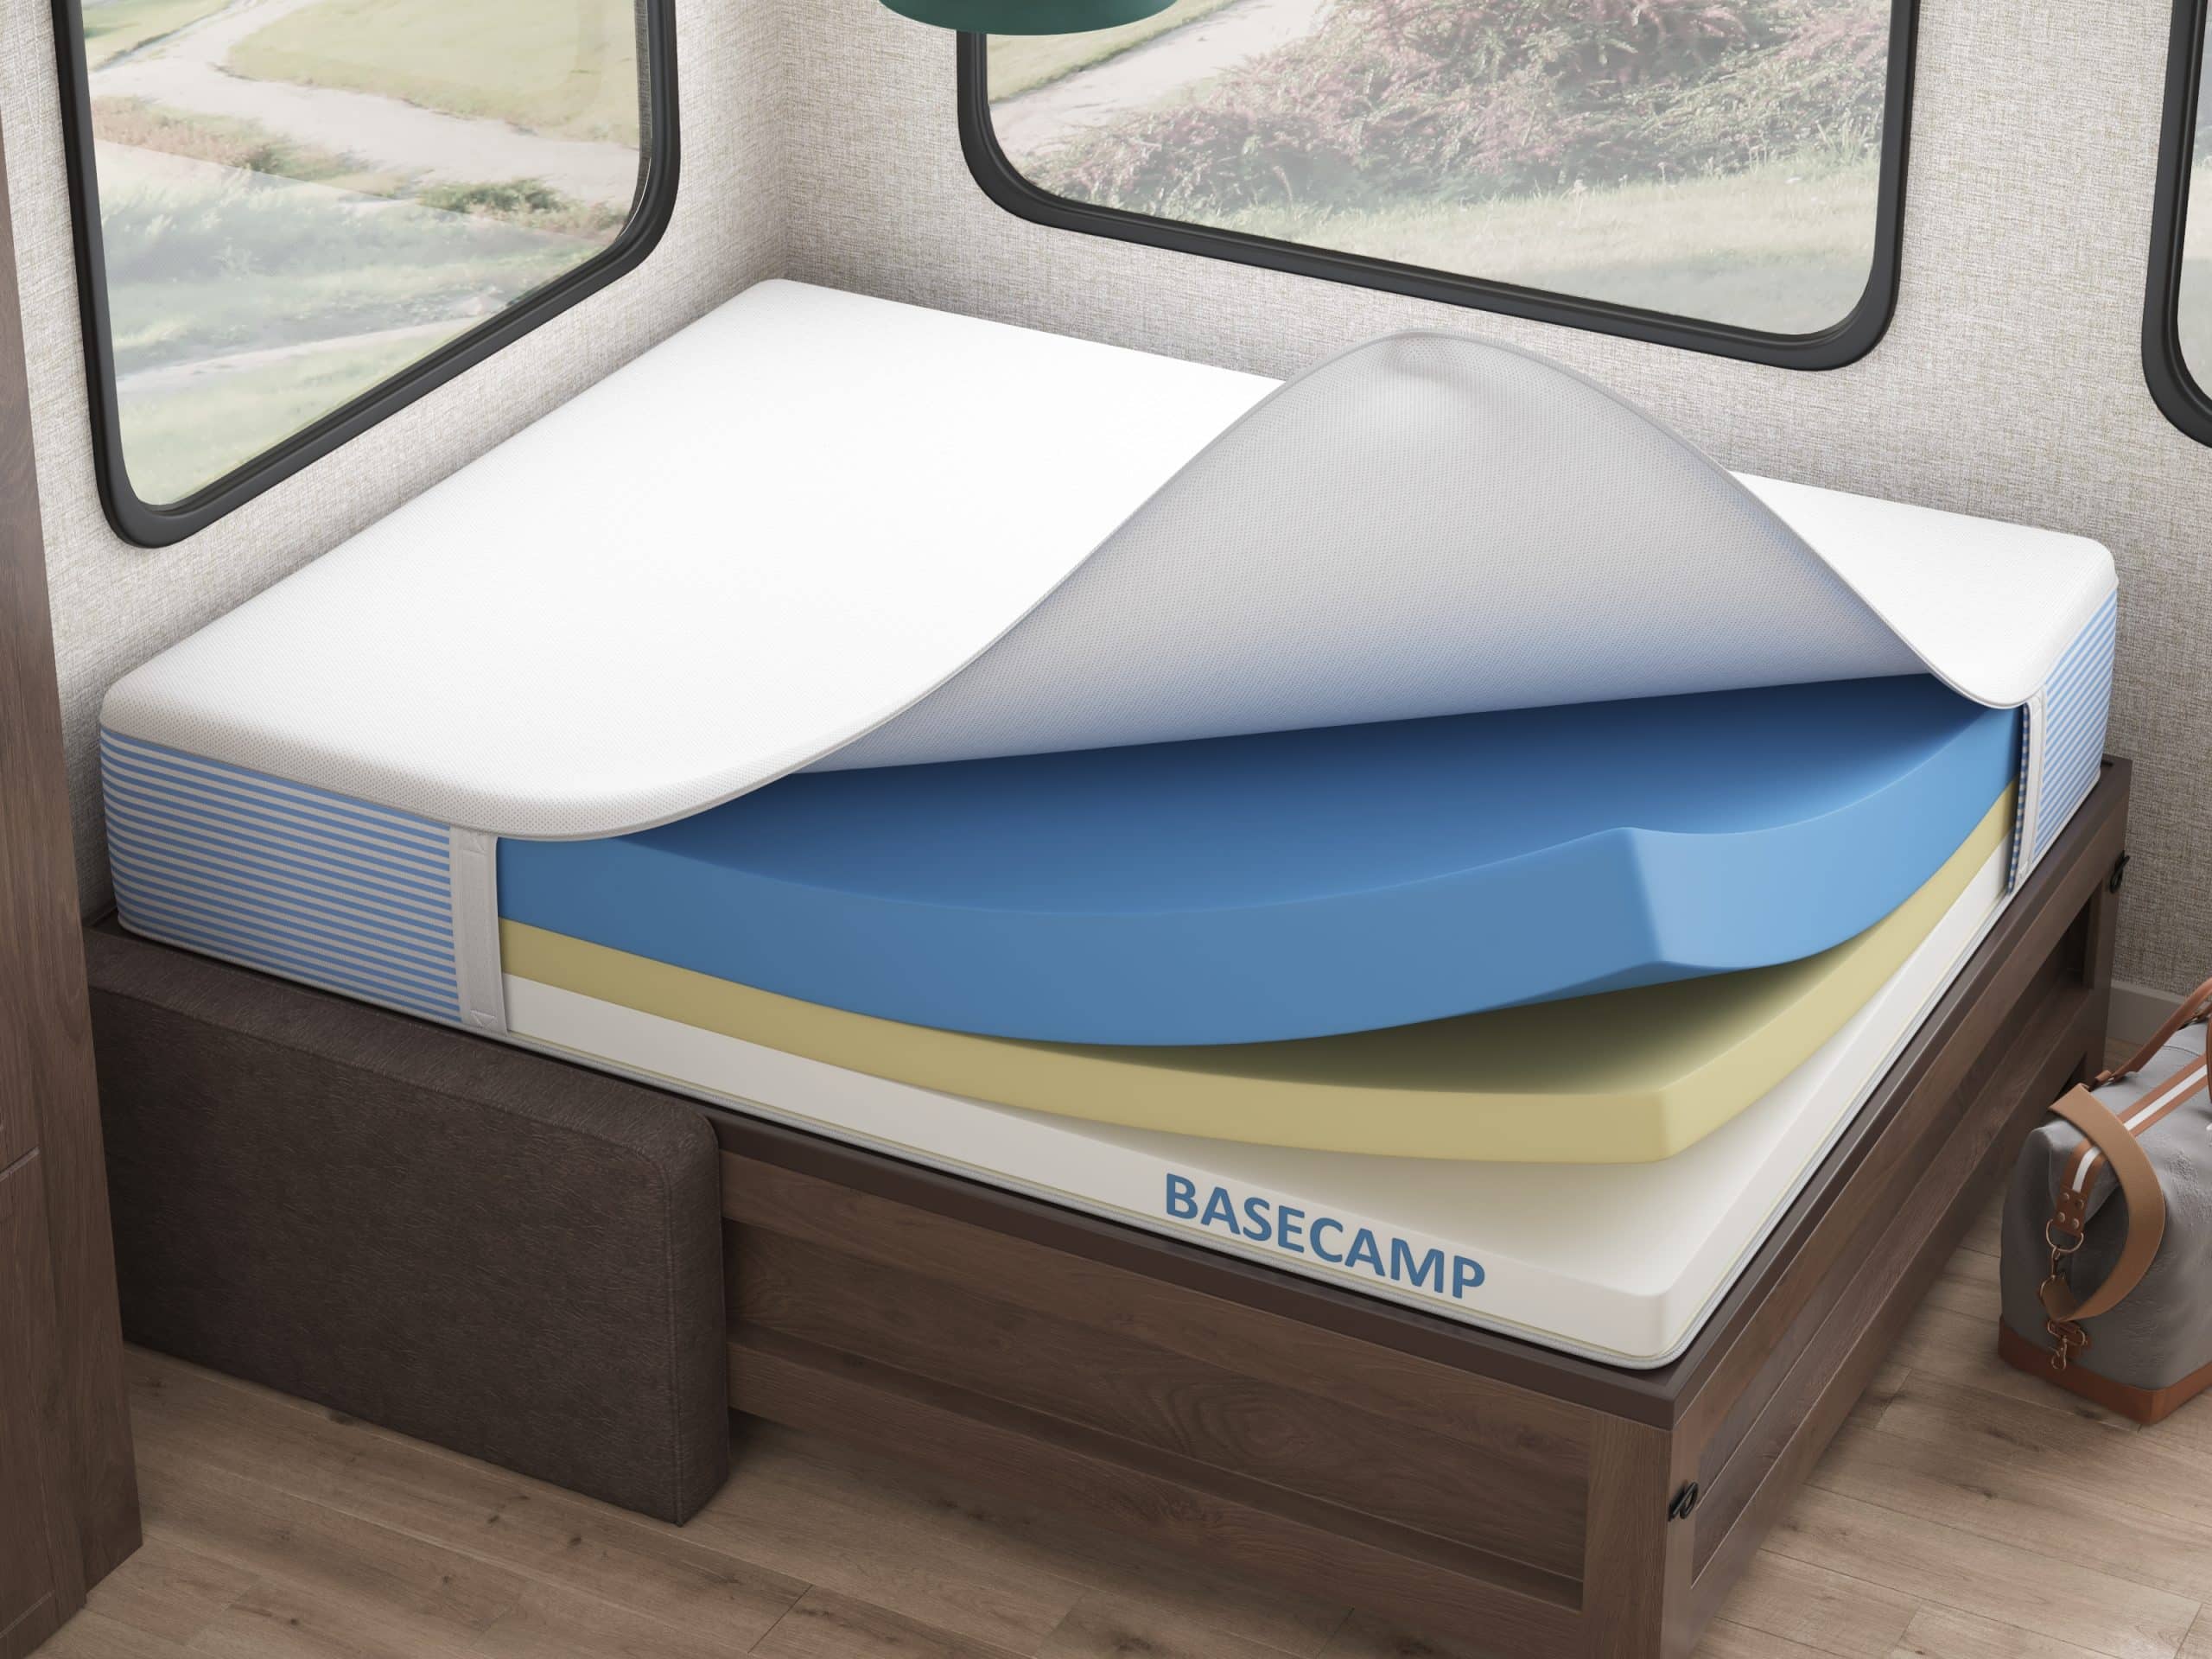 Basecamp 4" Mattress for use in Motorhomes and Campers